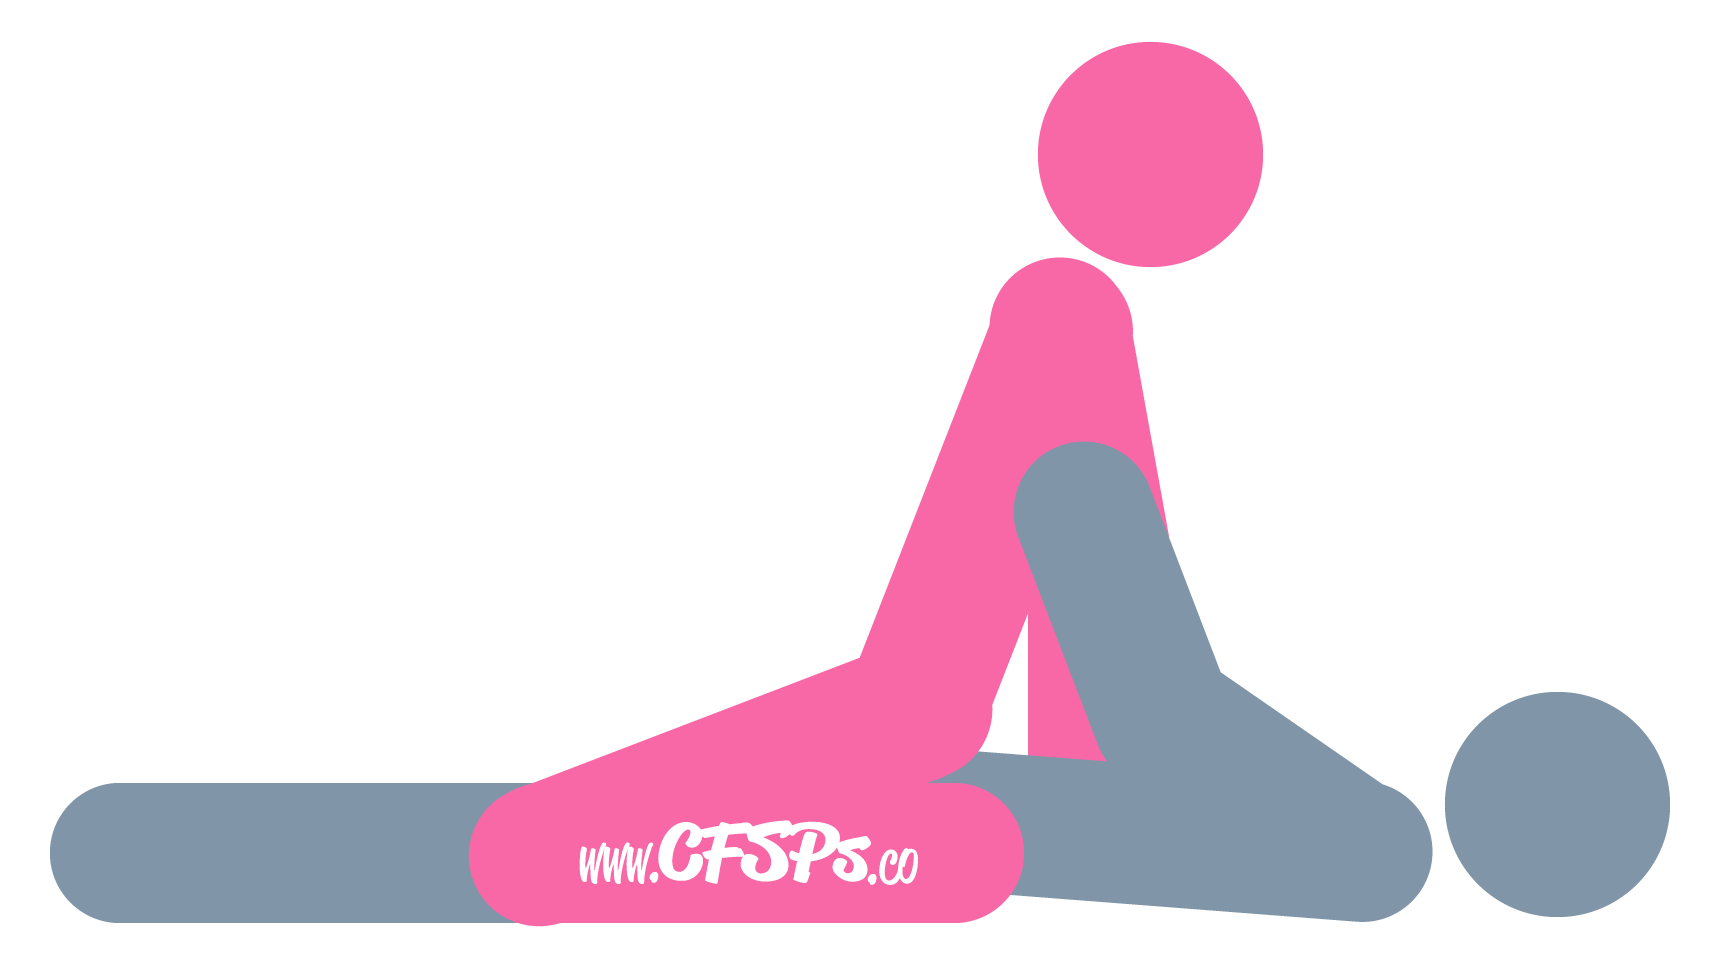 This stick figure image depicts a man and woman having sex in the Reverse Cowgirl Rocker sex position. The man is lying on his back in bed. The woman is straddling his pelvis while facing away from him. Her knees are outside of his, and she's sitting back on him and supporting herself with her arms on his chest behind her.